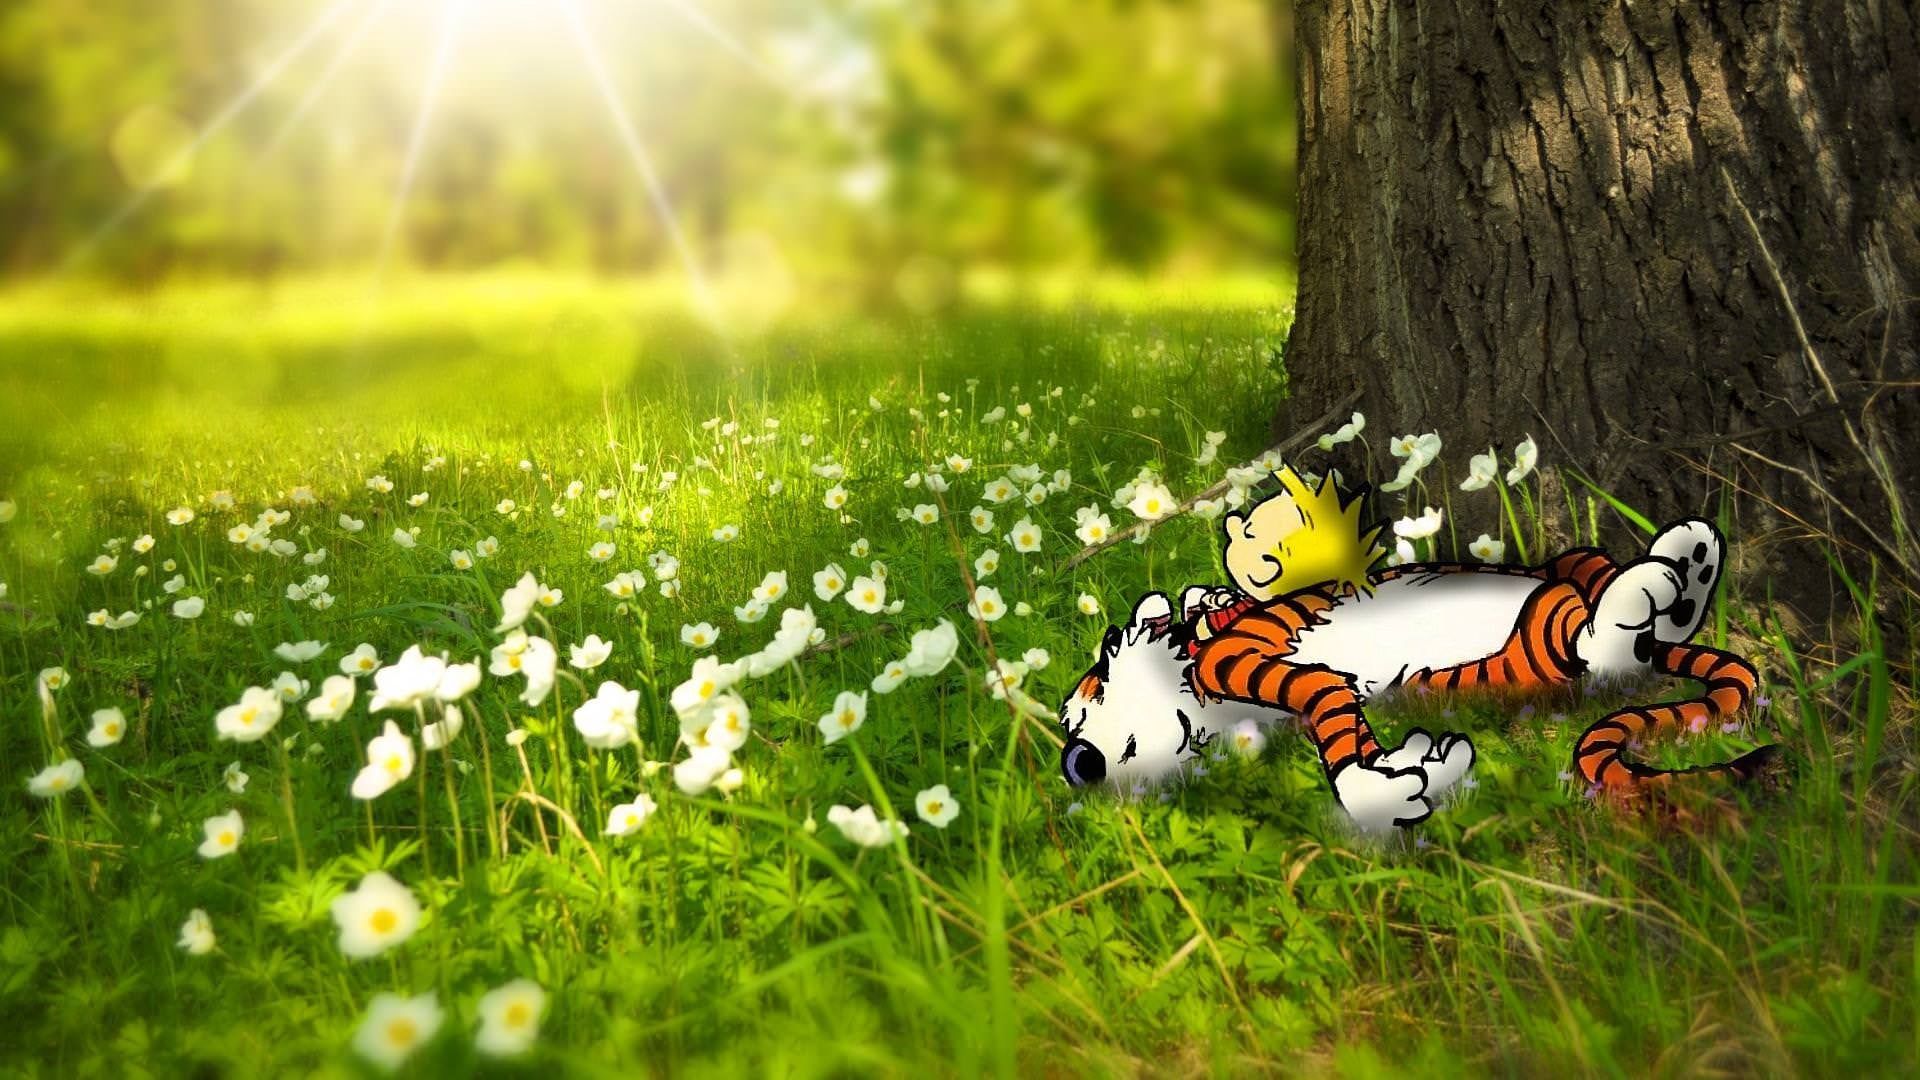 Calvin and Hobbes [1920x1080]